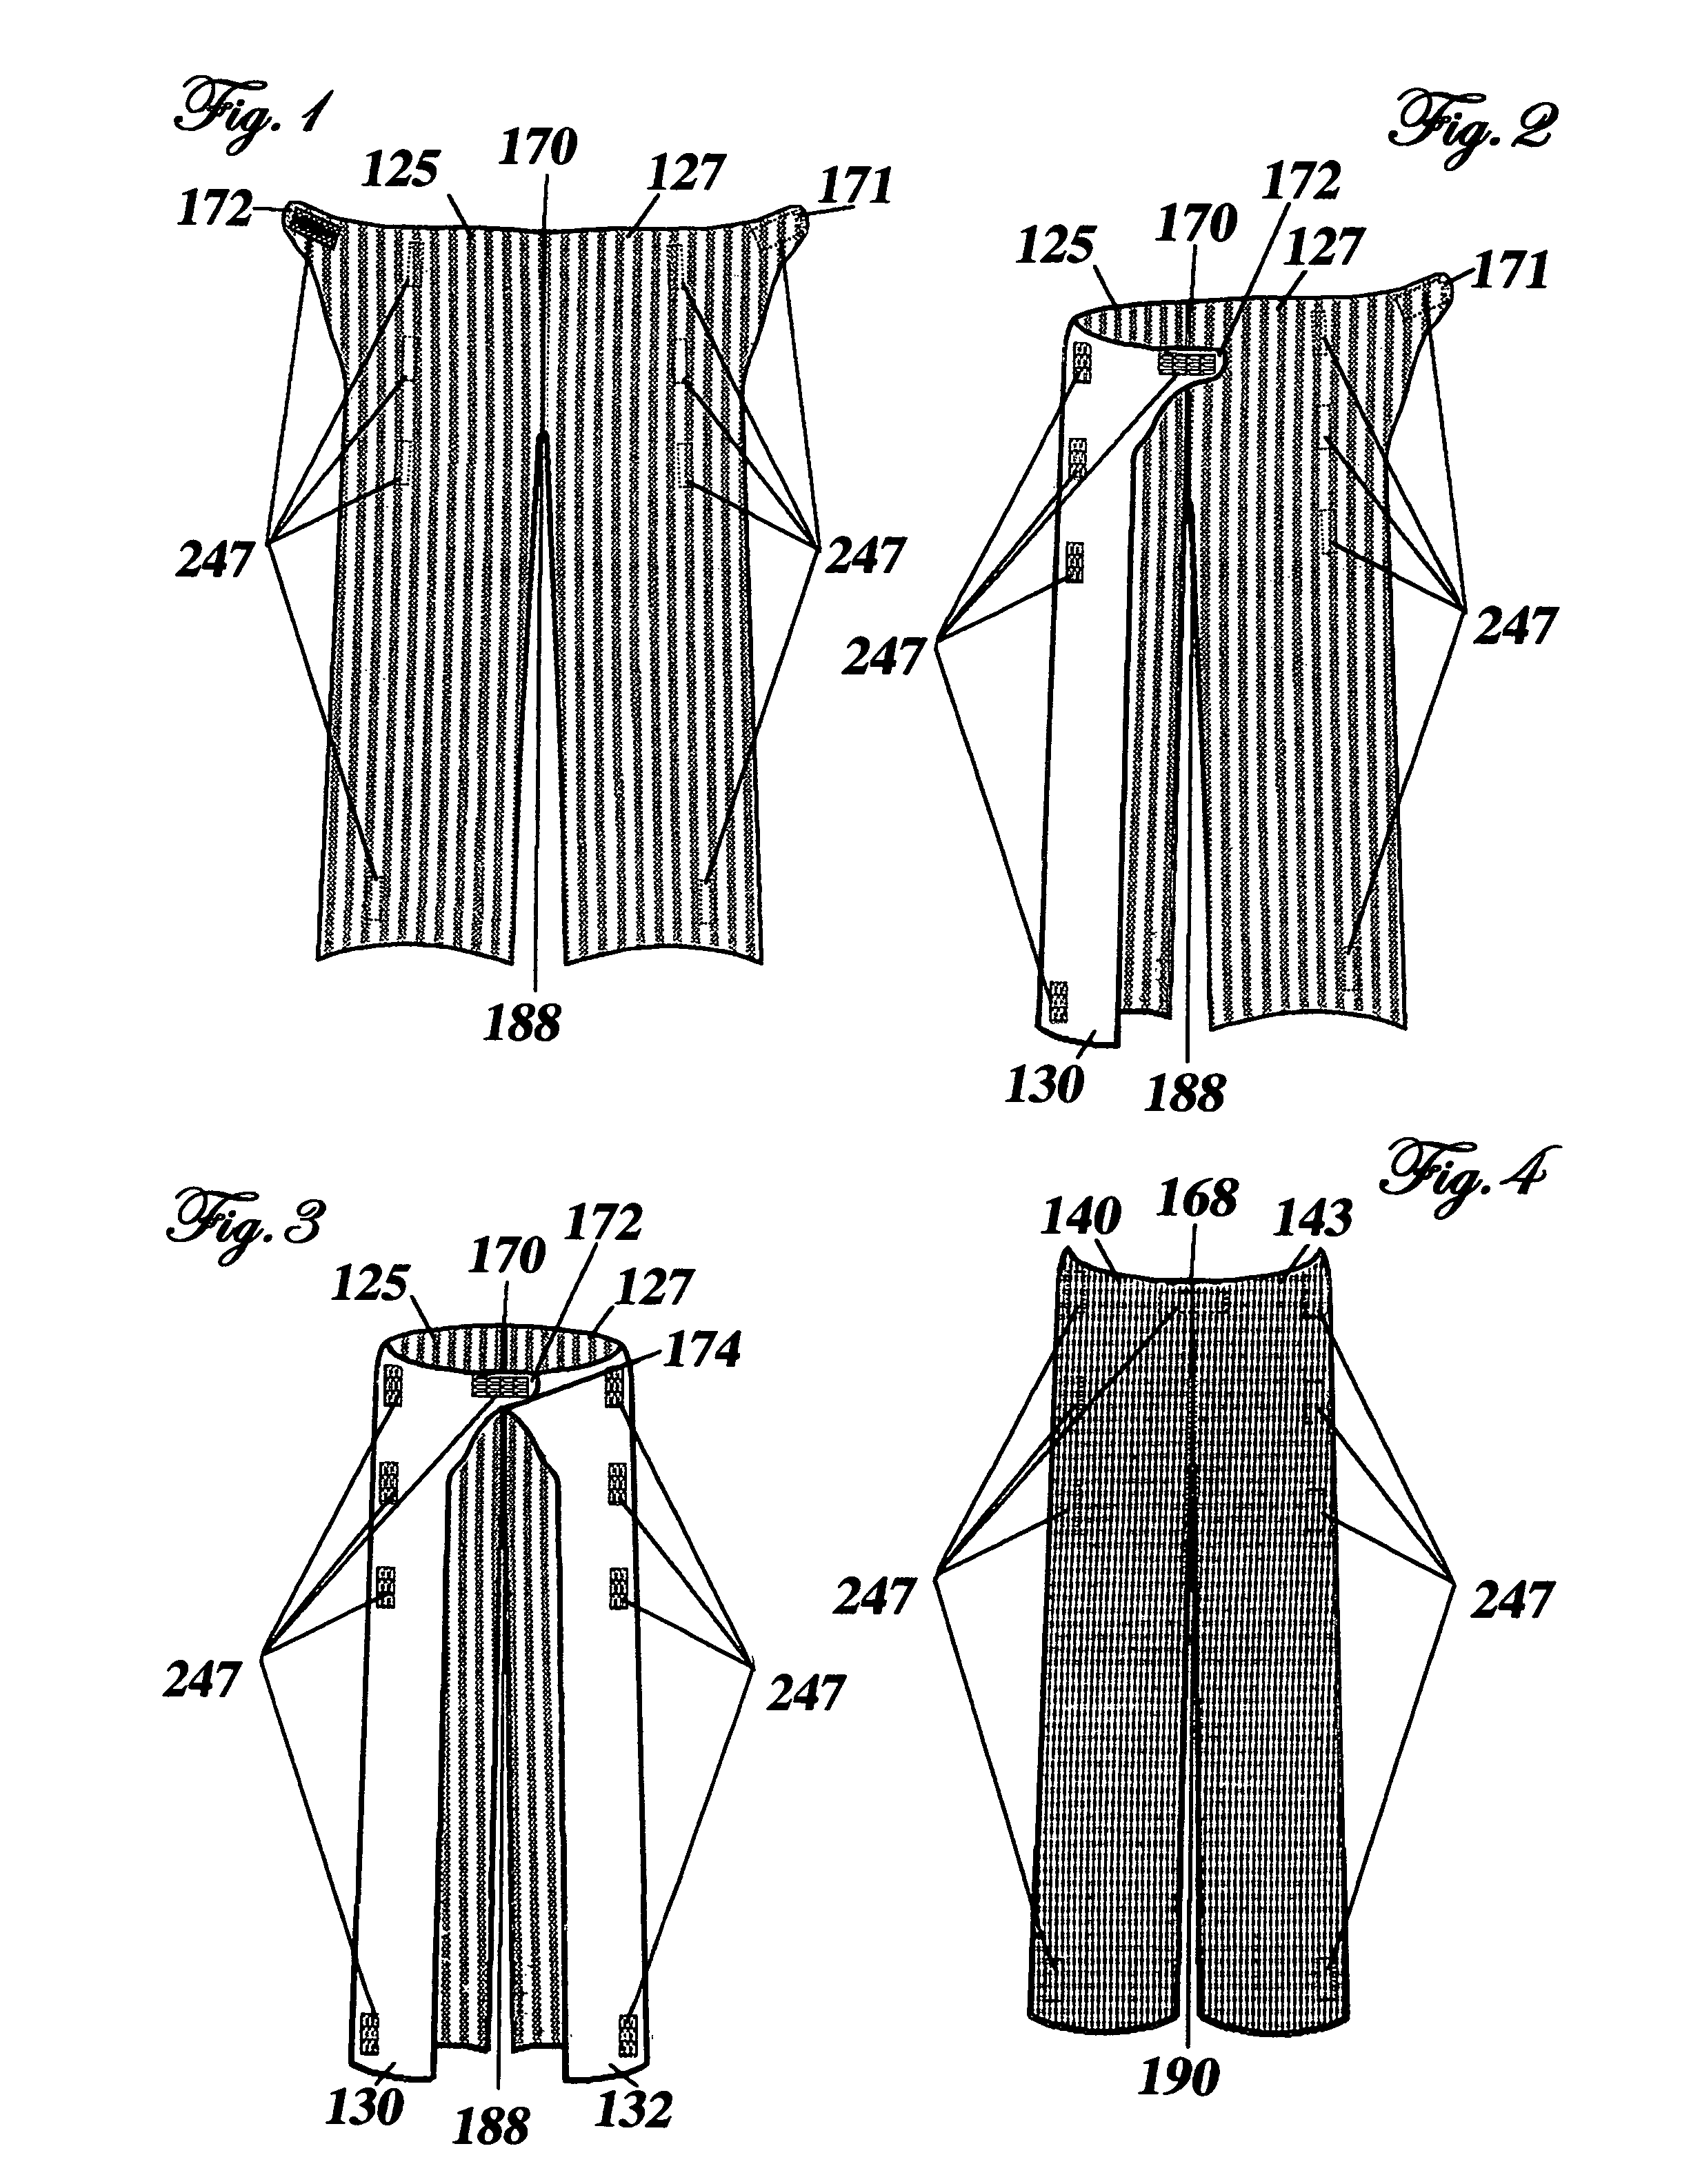 Garments with nontraditional access for impaired individuals